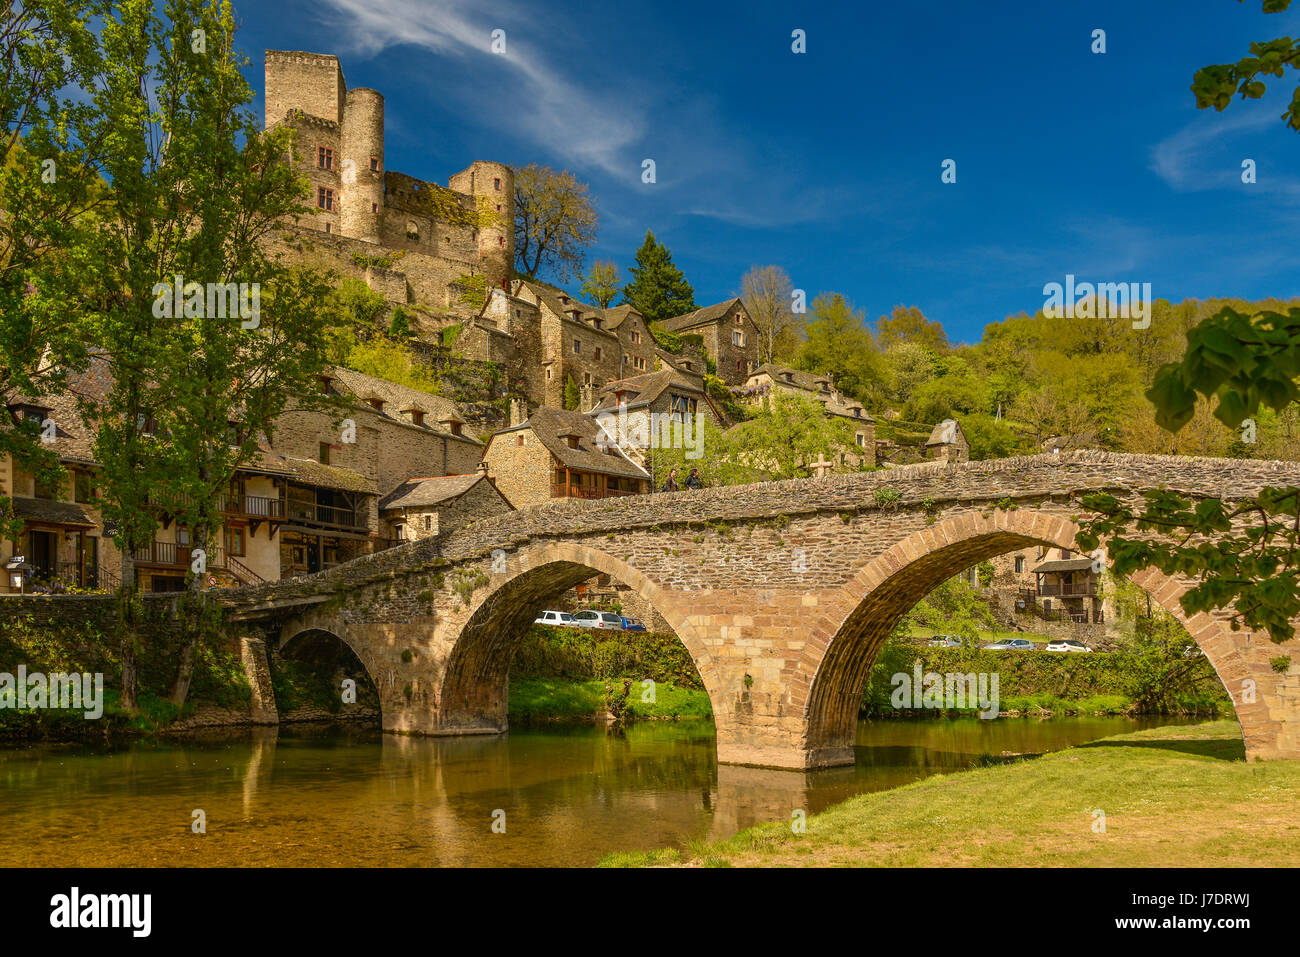 A daytime view of the arched, 15th century stone bridge spanning the river Aveyron at Belcastel, in Occitanie, France. Stock Photo